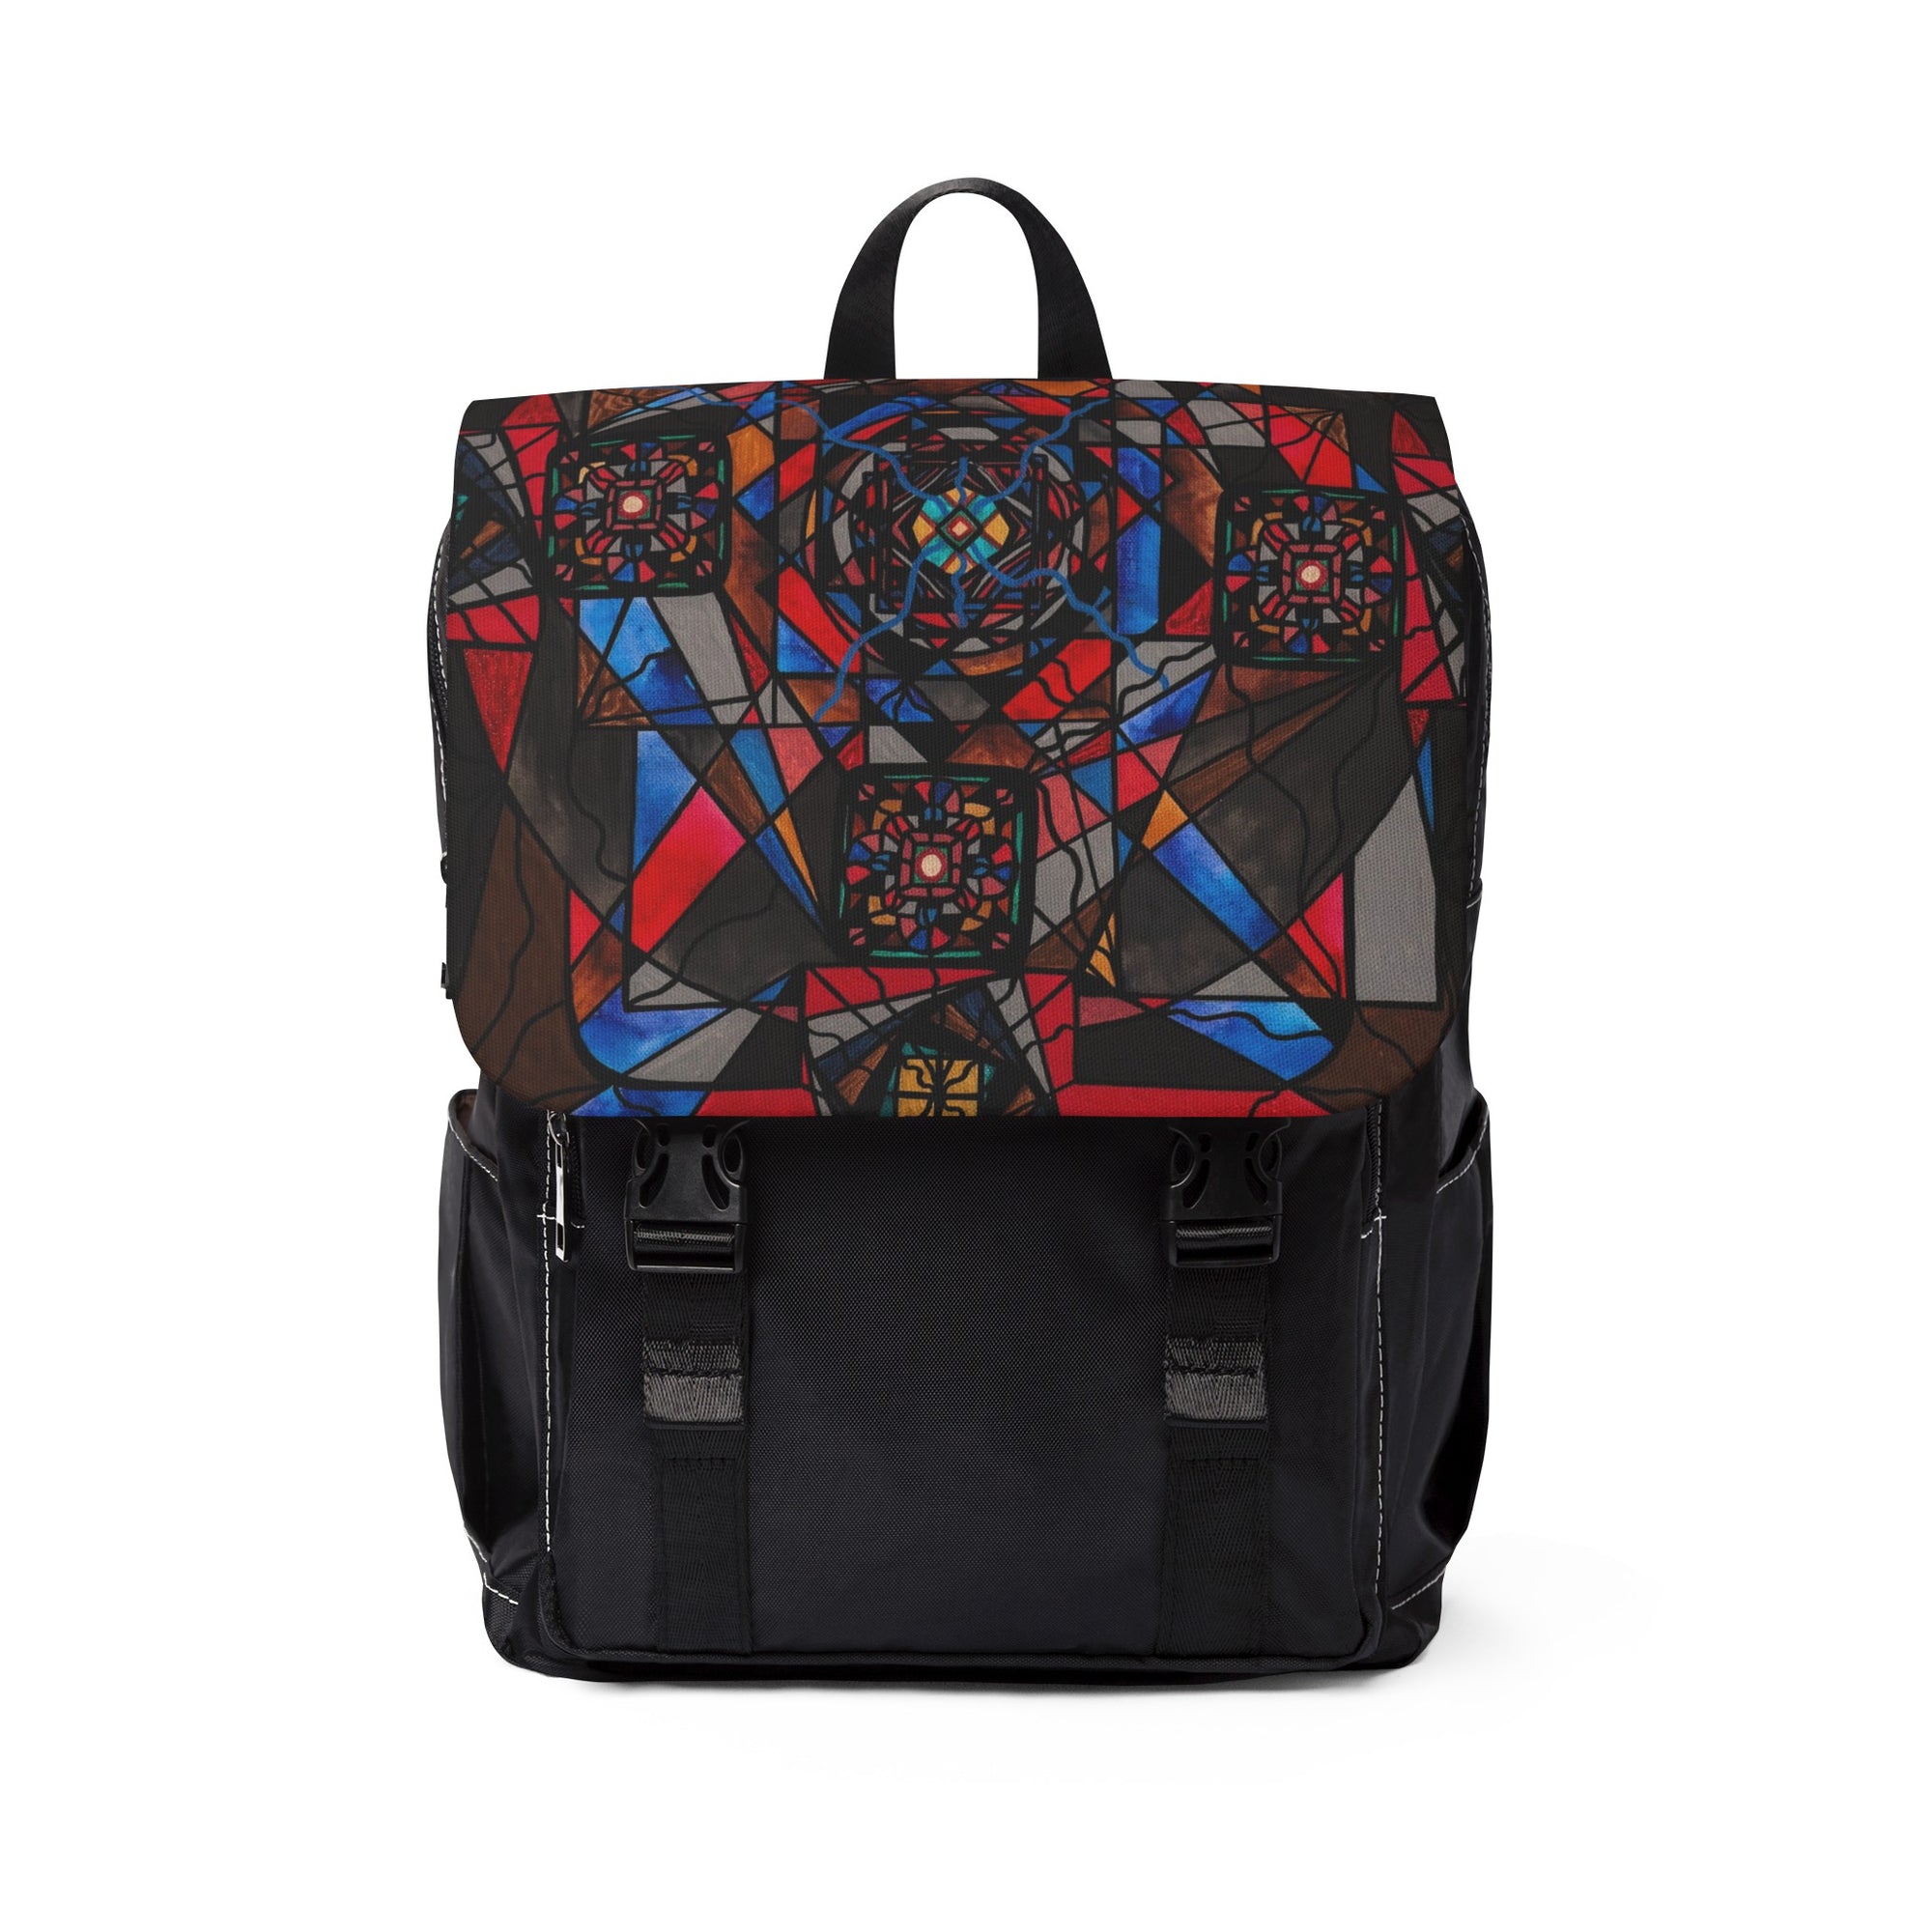 Containment - Unisex Casual Shoulder Backpack